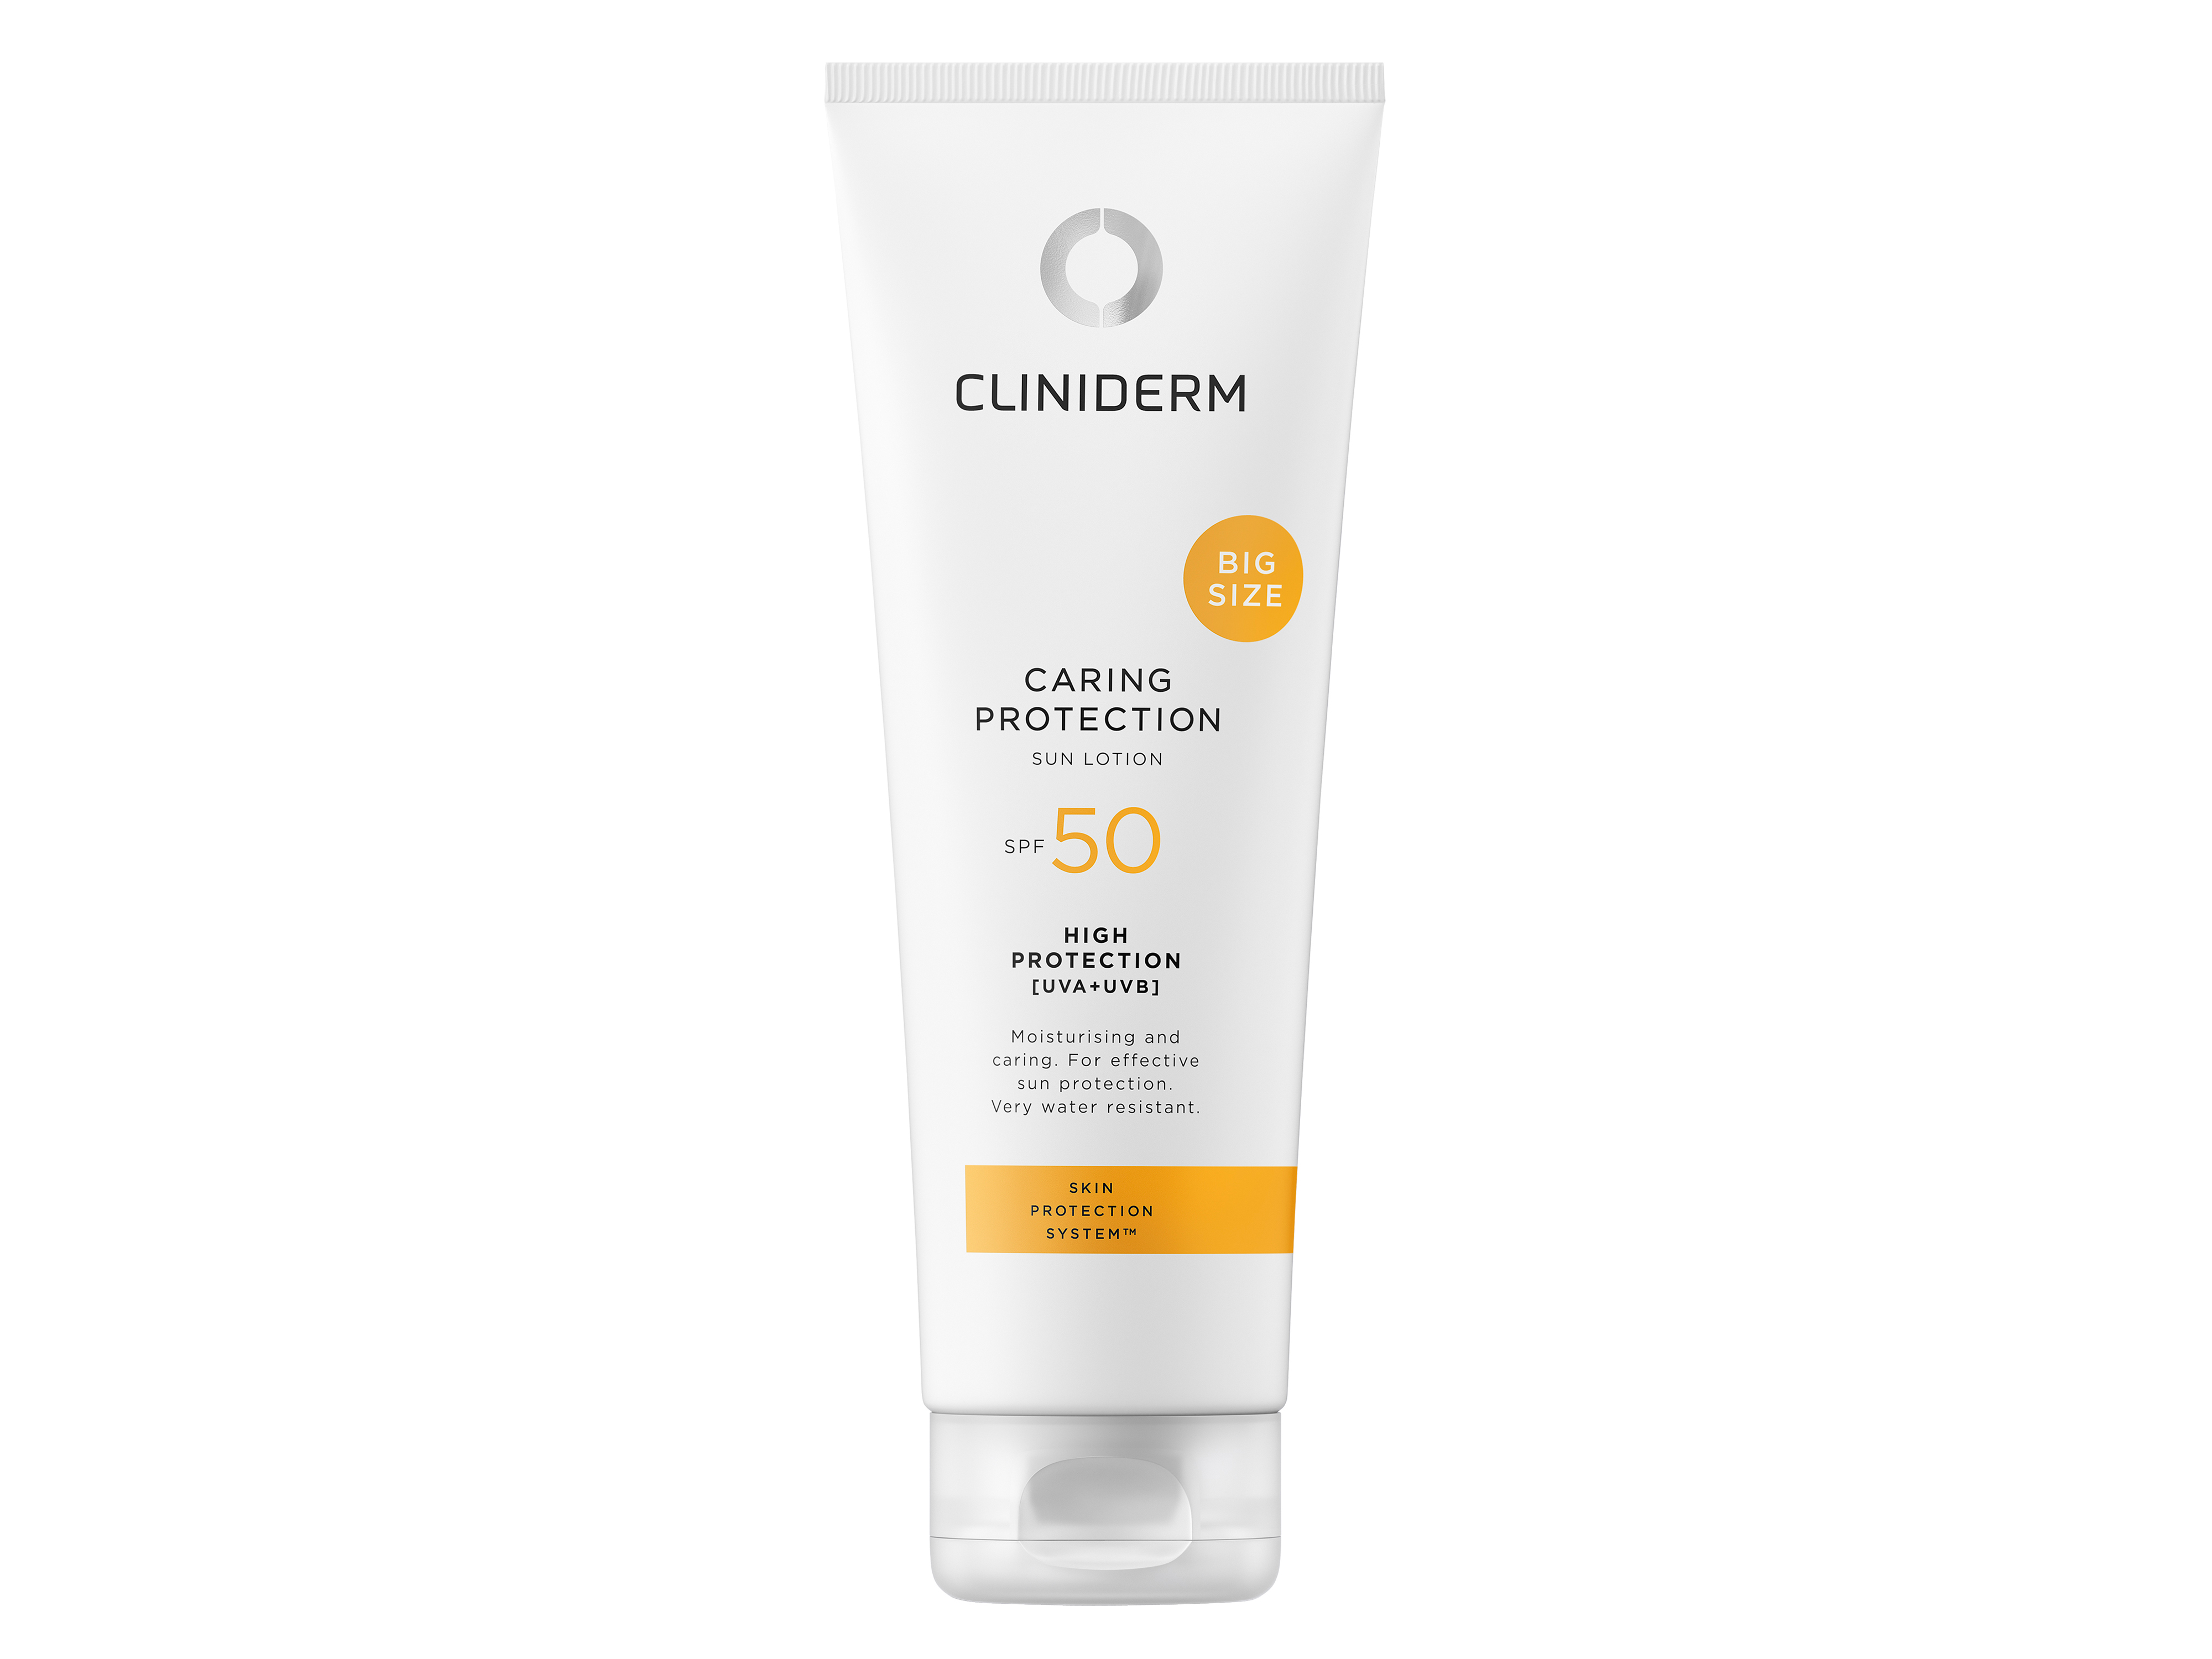 Cliniderm Caring Protection Sun Lotion SPF50, 250 ml